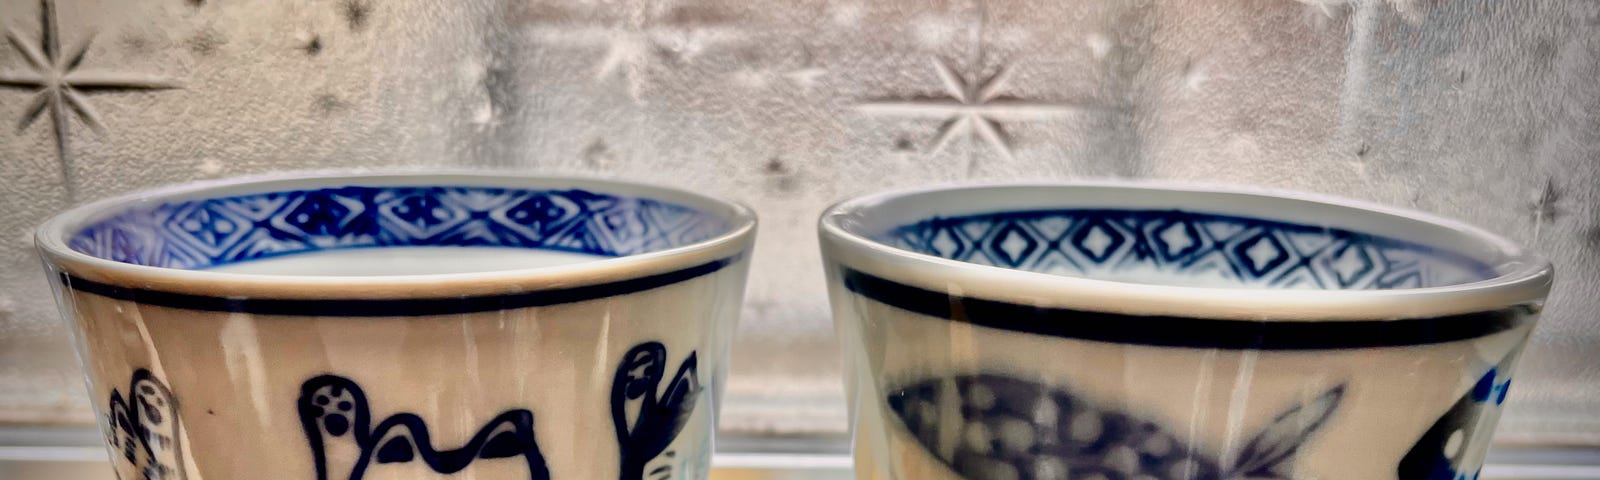 A pair of Japanese ceramic cups with cute animal (cat and fish) patterns